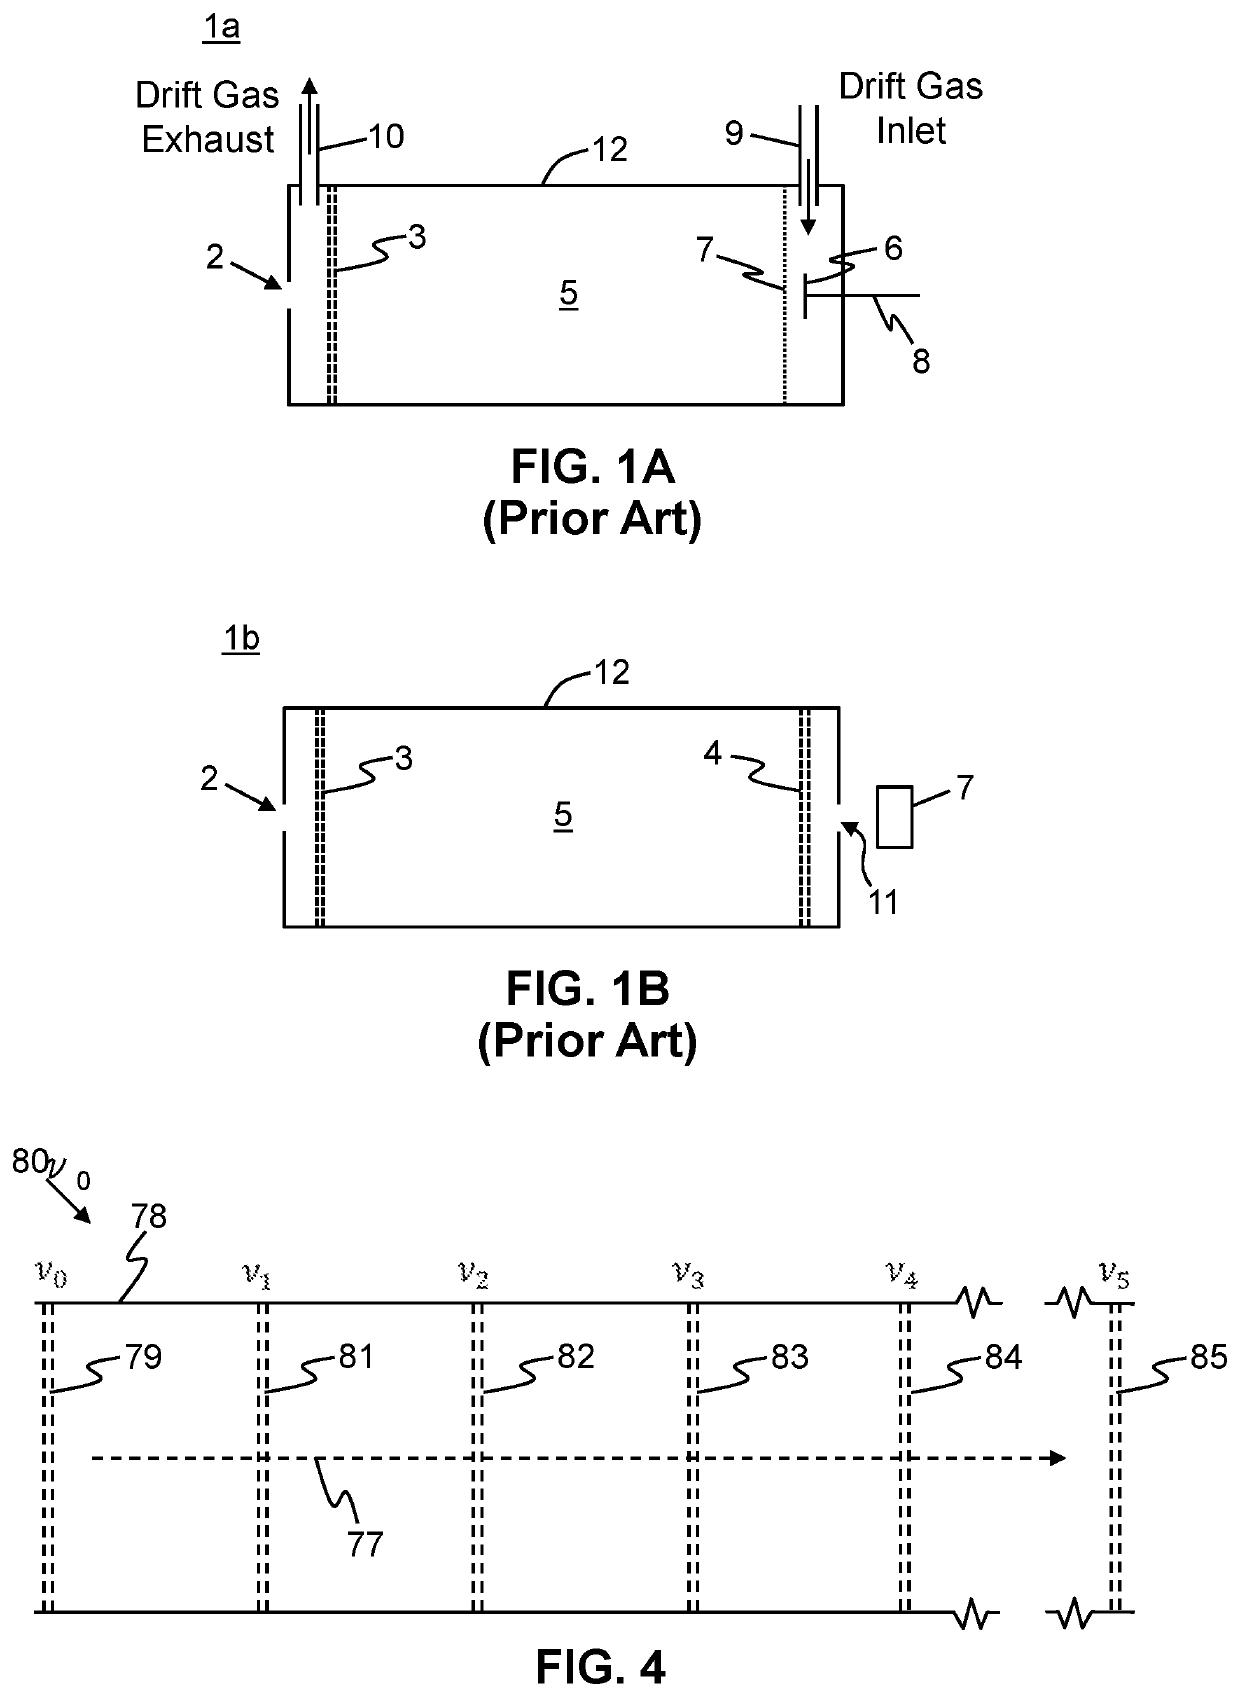 Multi-gate multi-frequency filter for ion mobility isolation